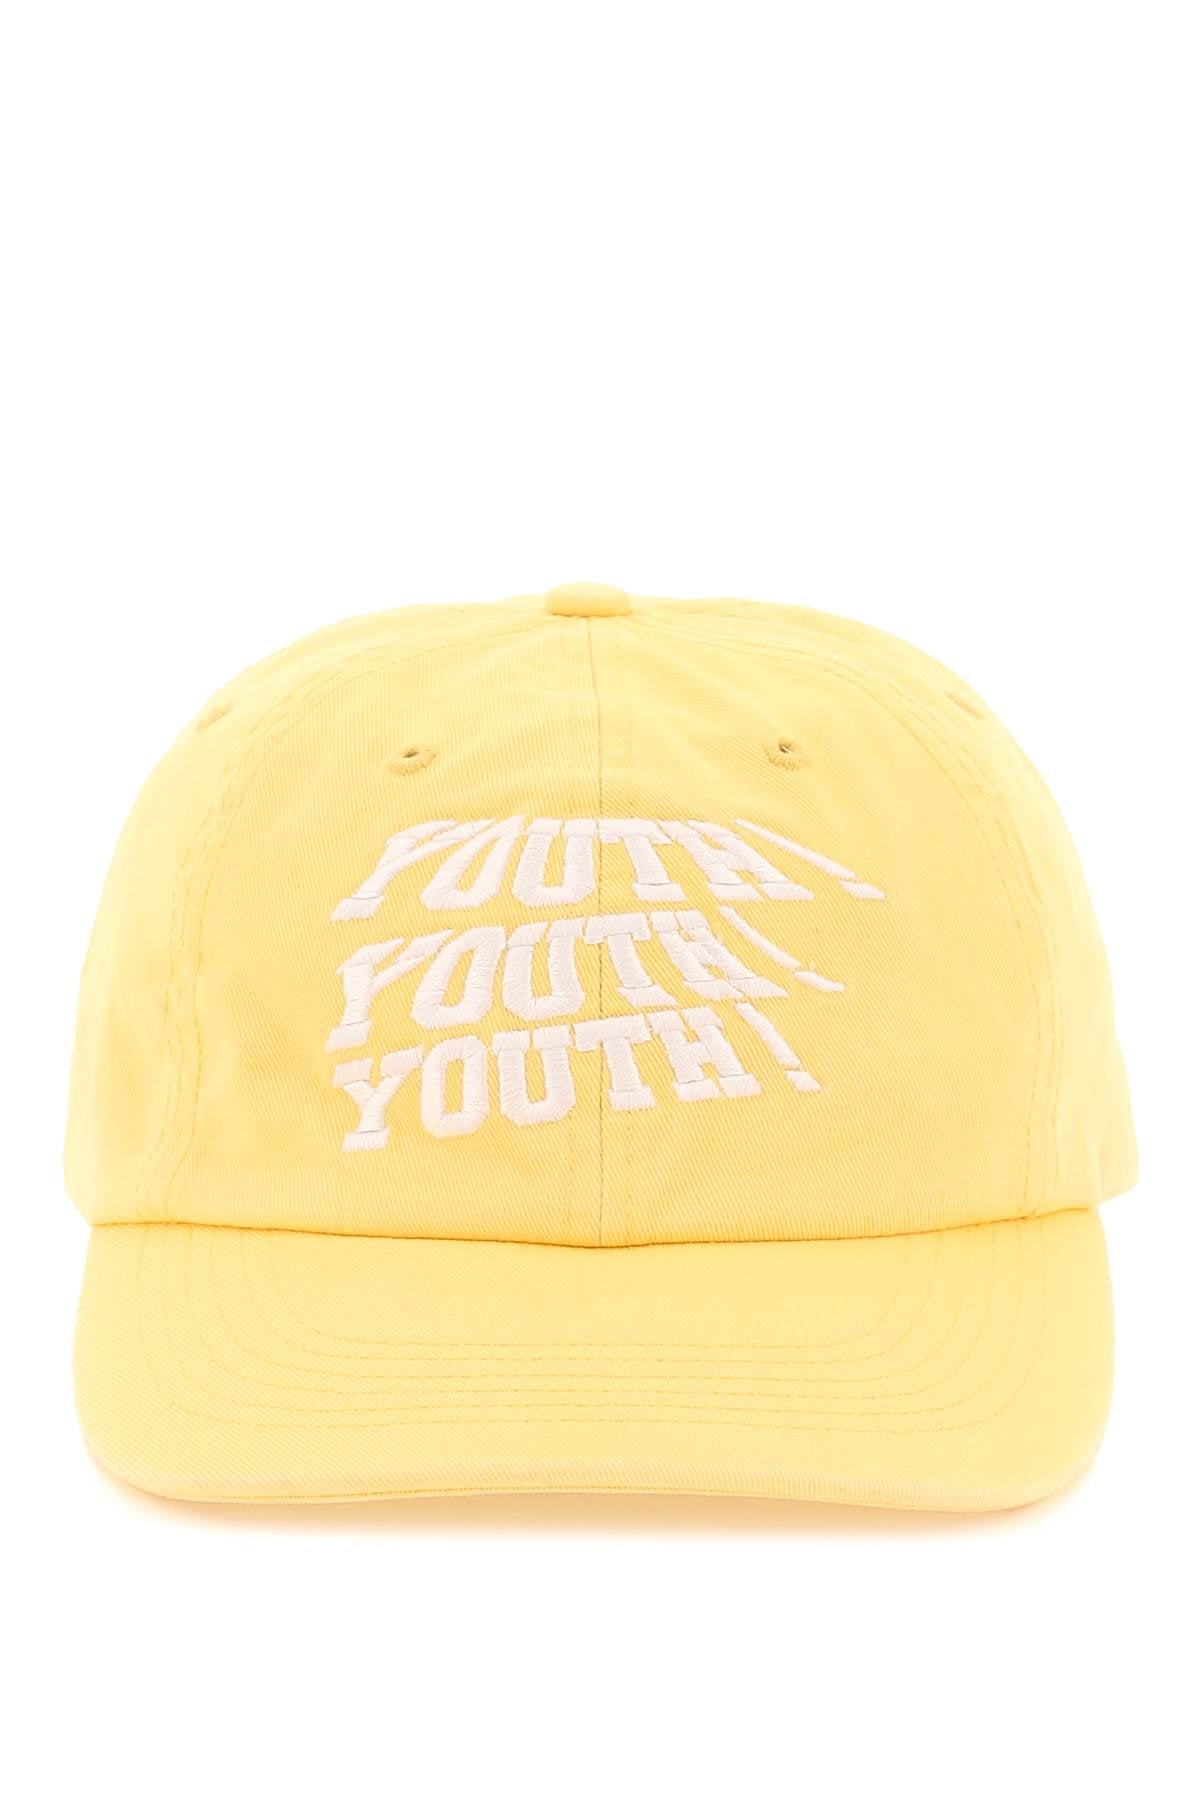 Liberal youth ministry cotton baseball cap-0